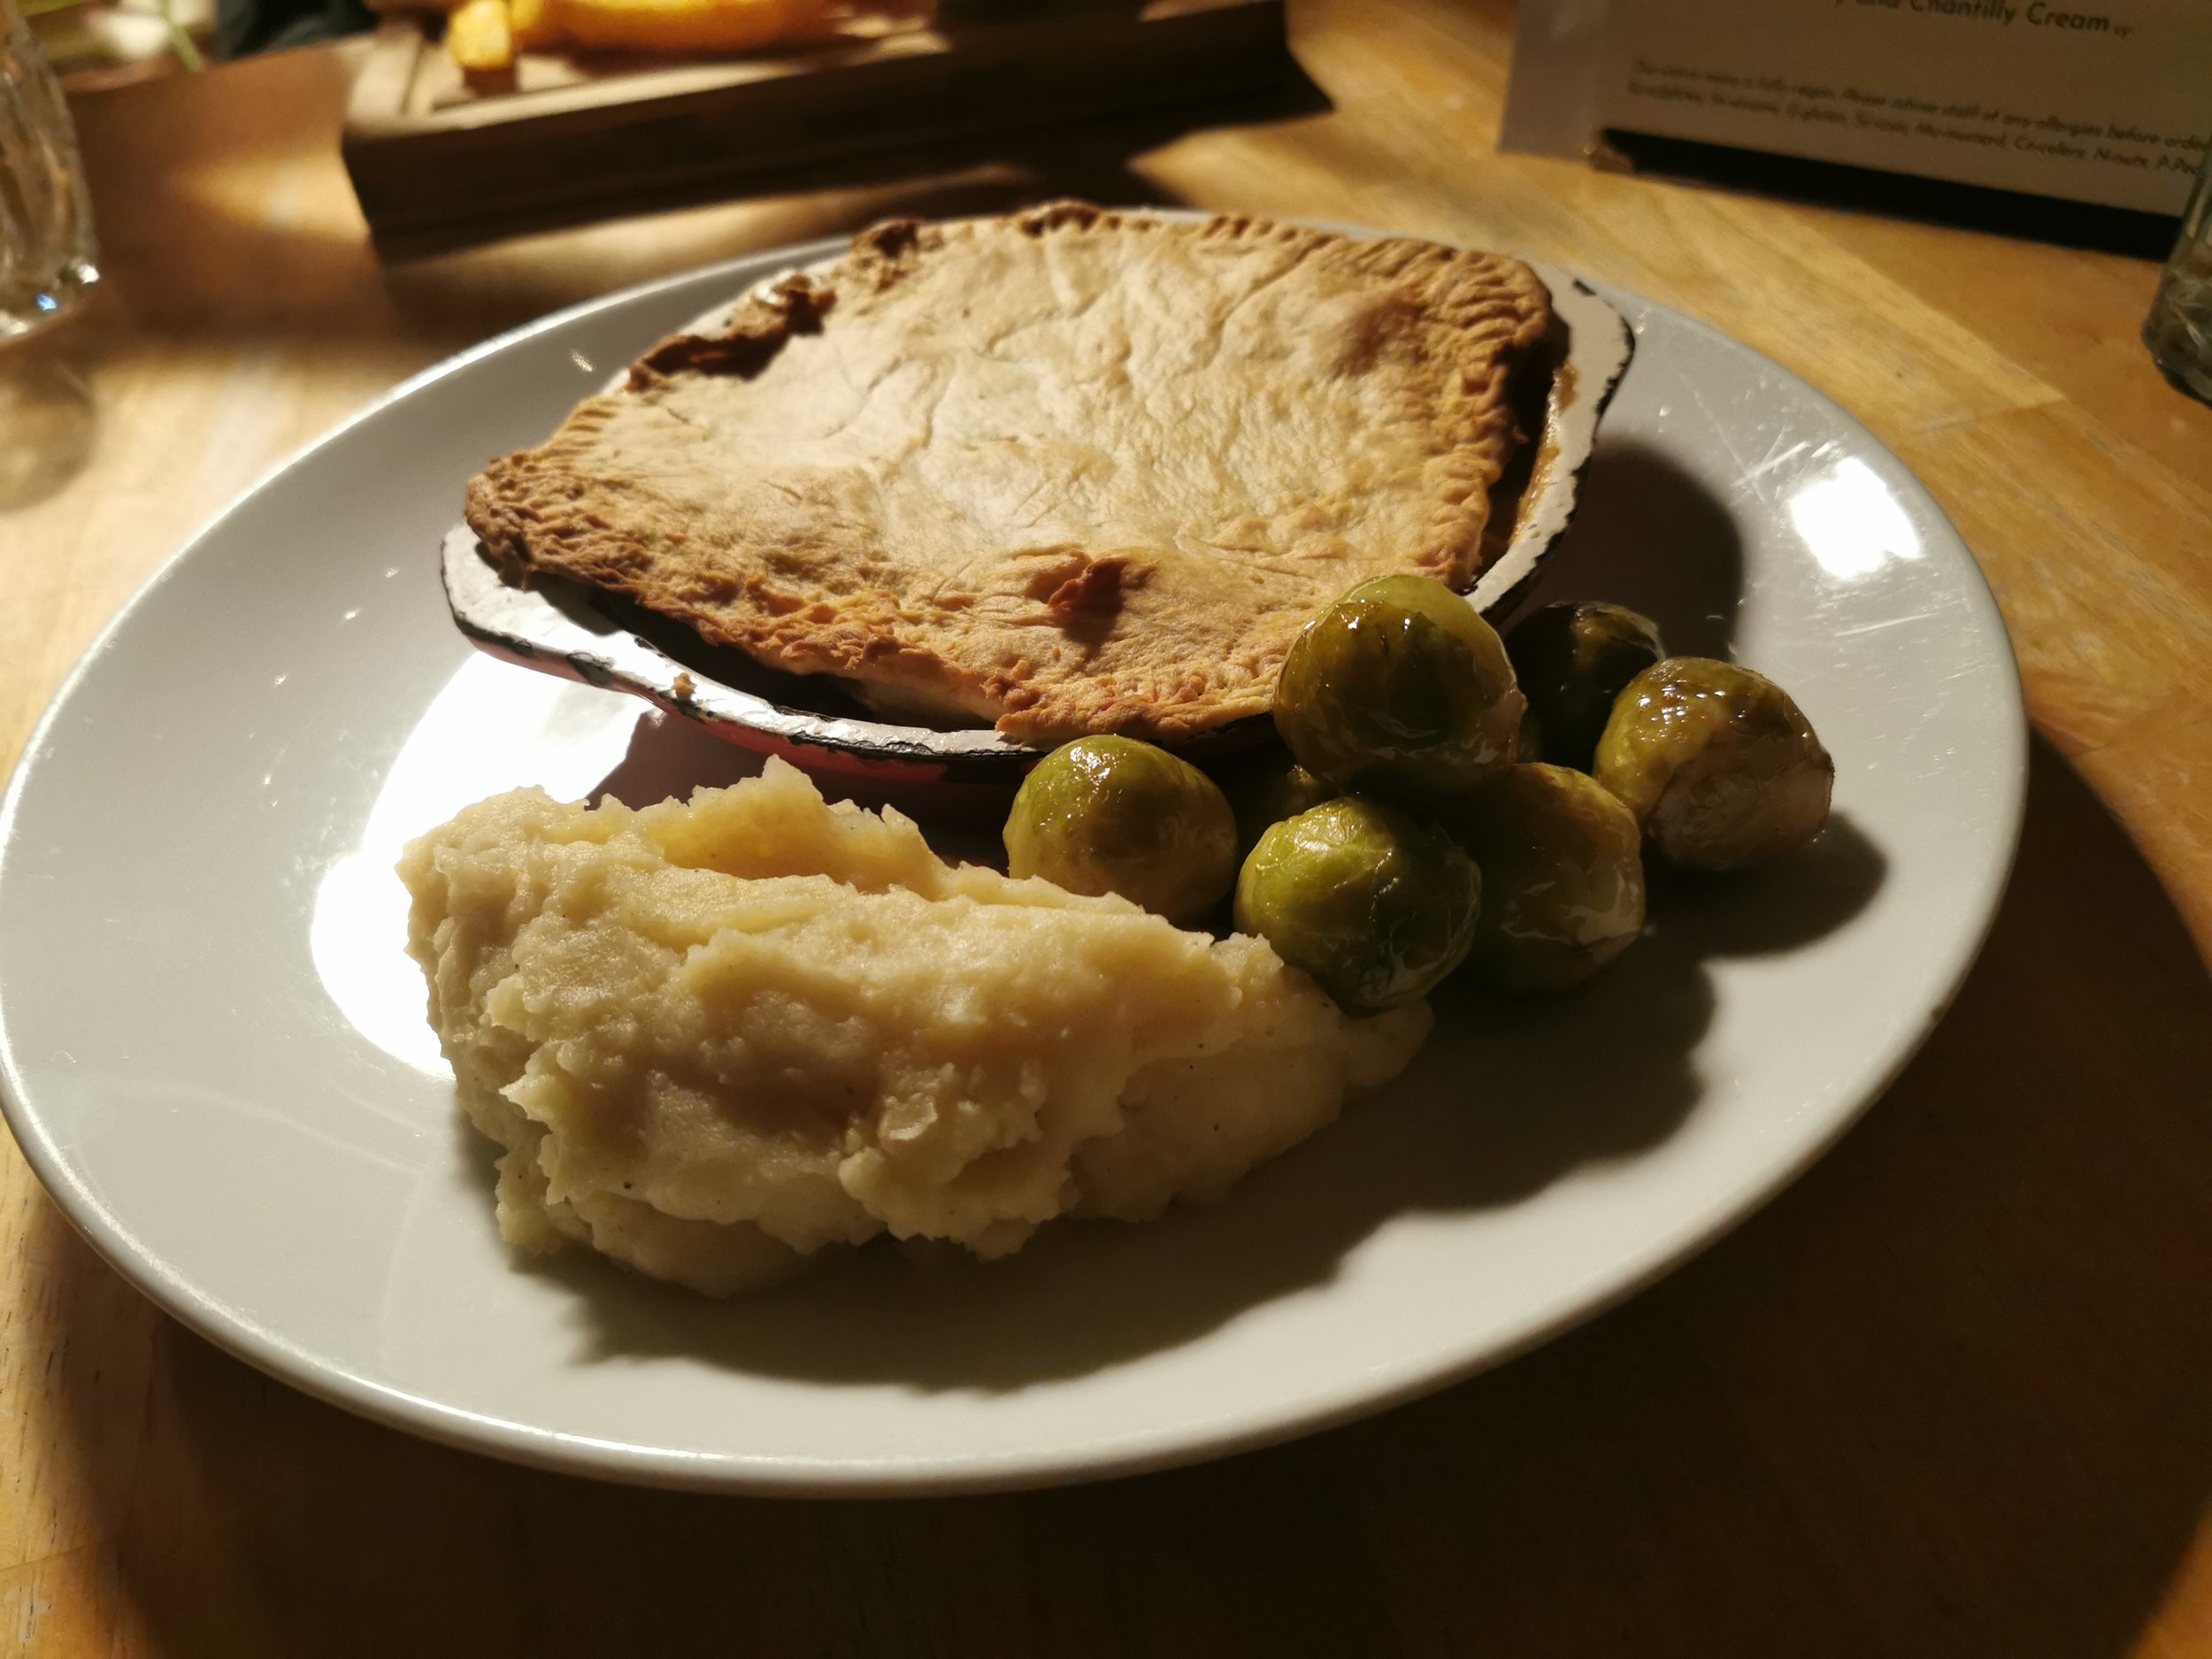 Creamy Mushroom Leak and Potato Pie with Celeriac Mash and Brussels Sprouts 